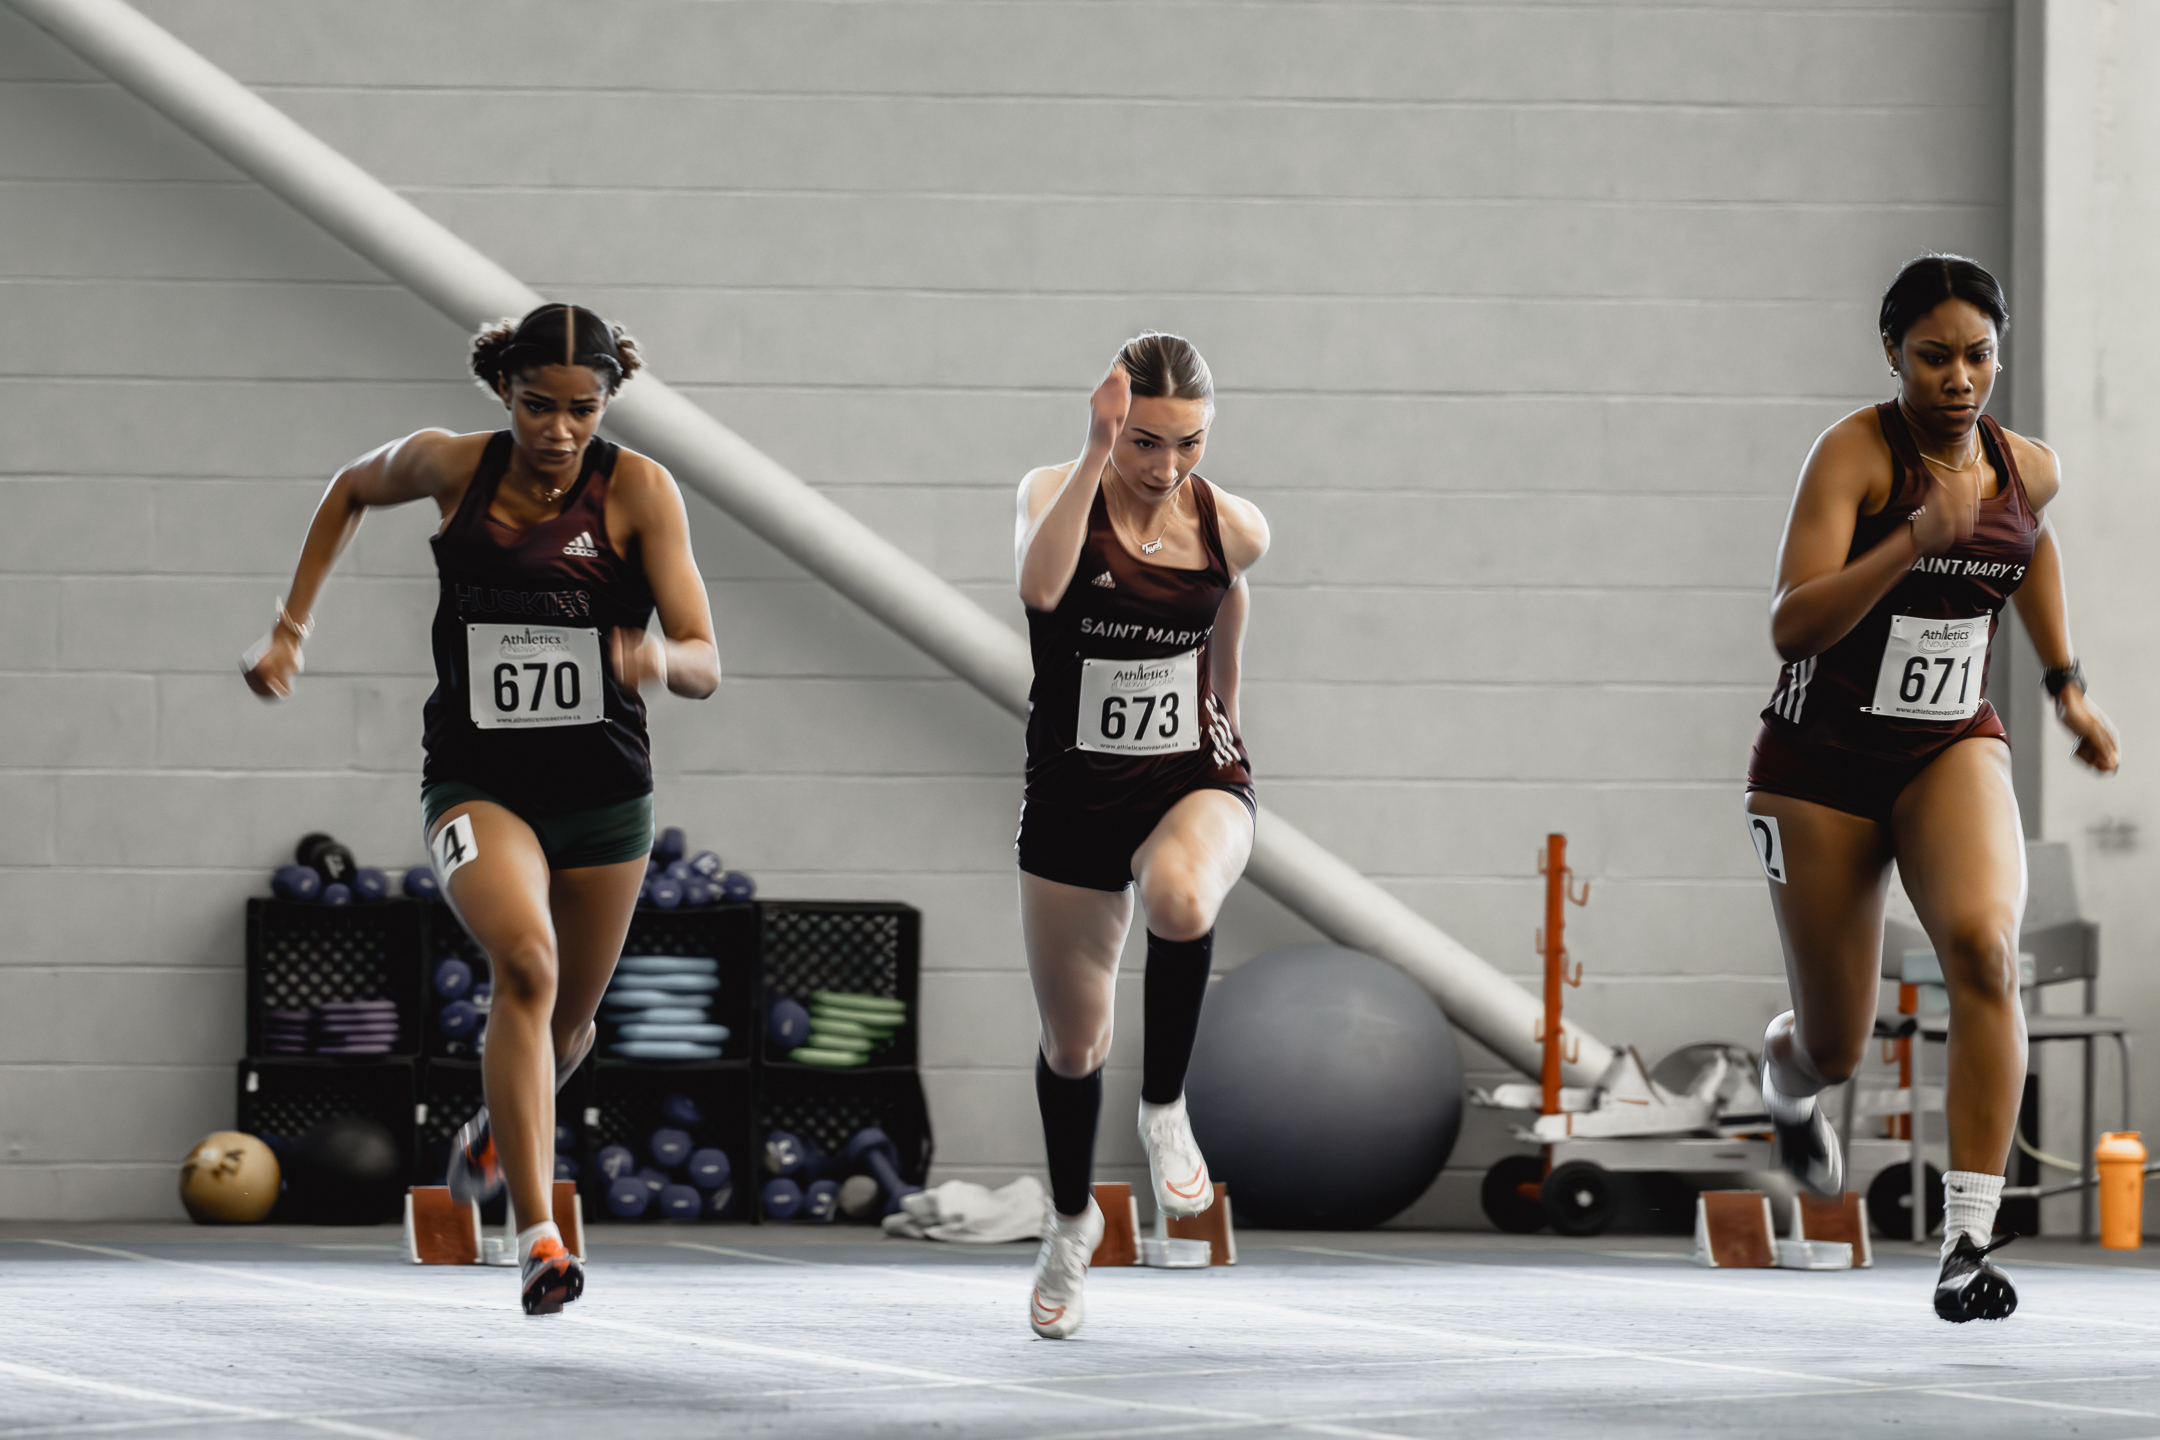 Huskies continue to post personal bests at Athletics NS Indoor Open